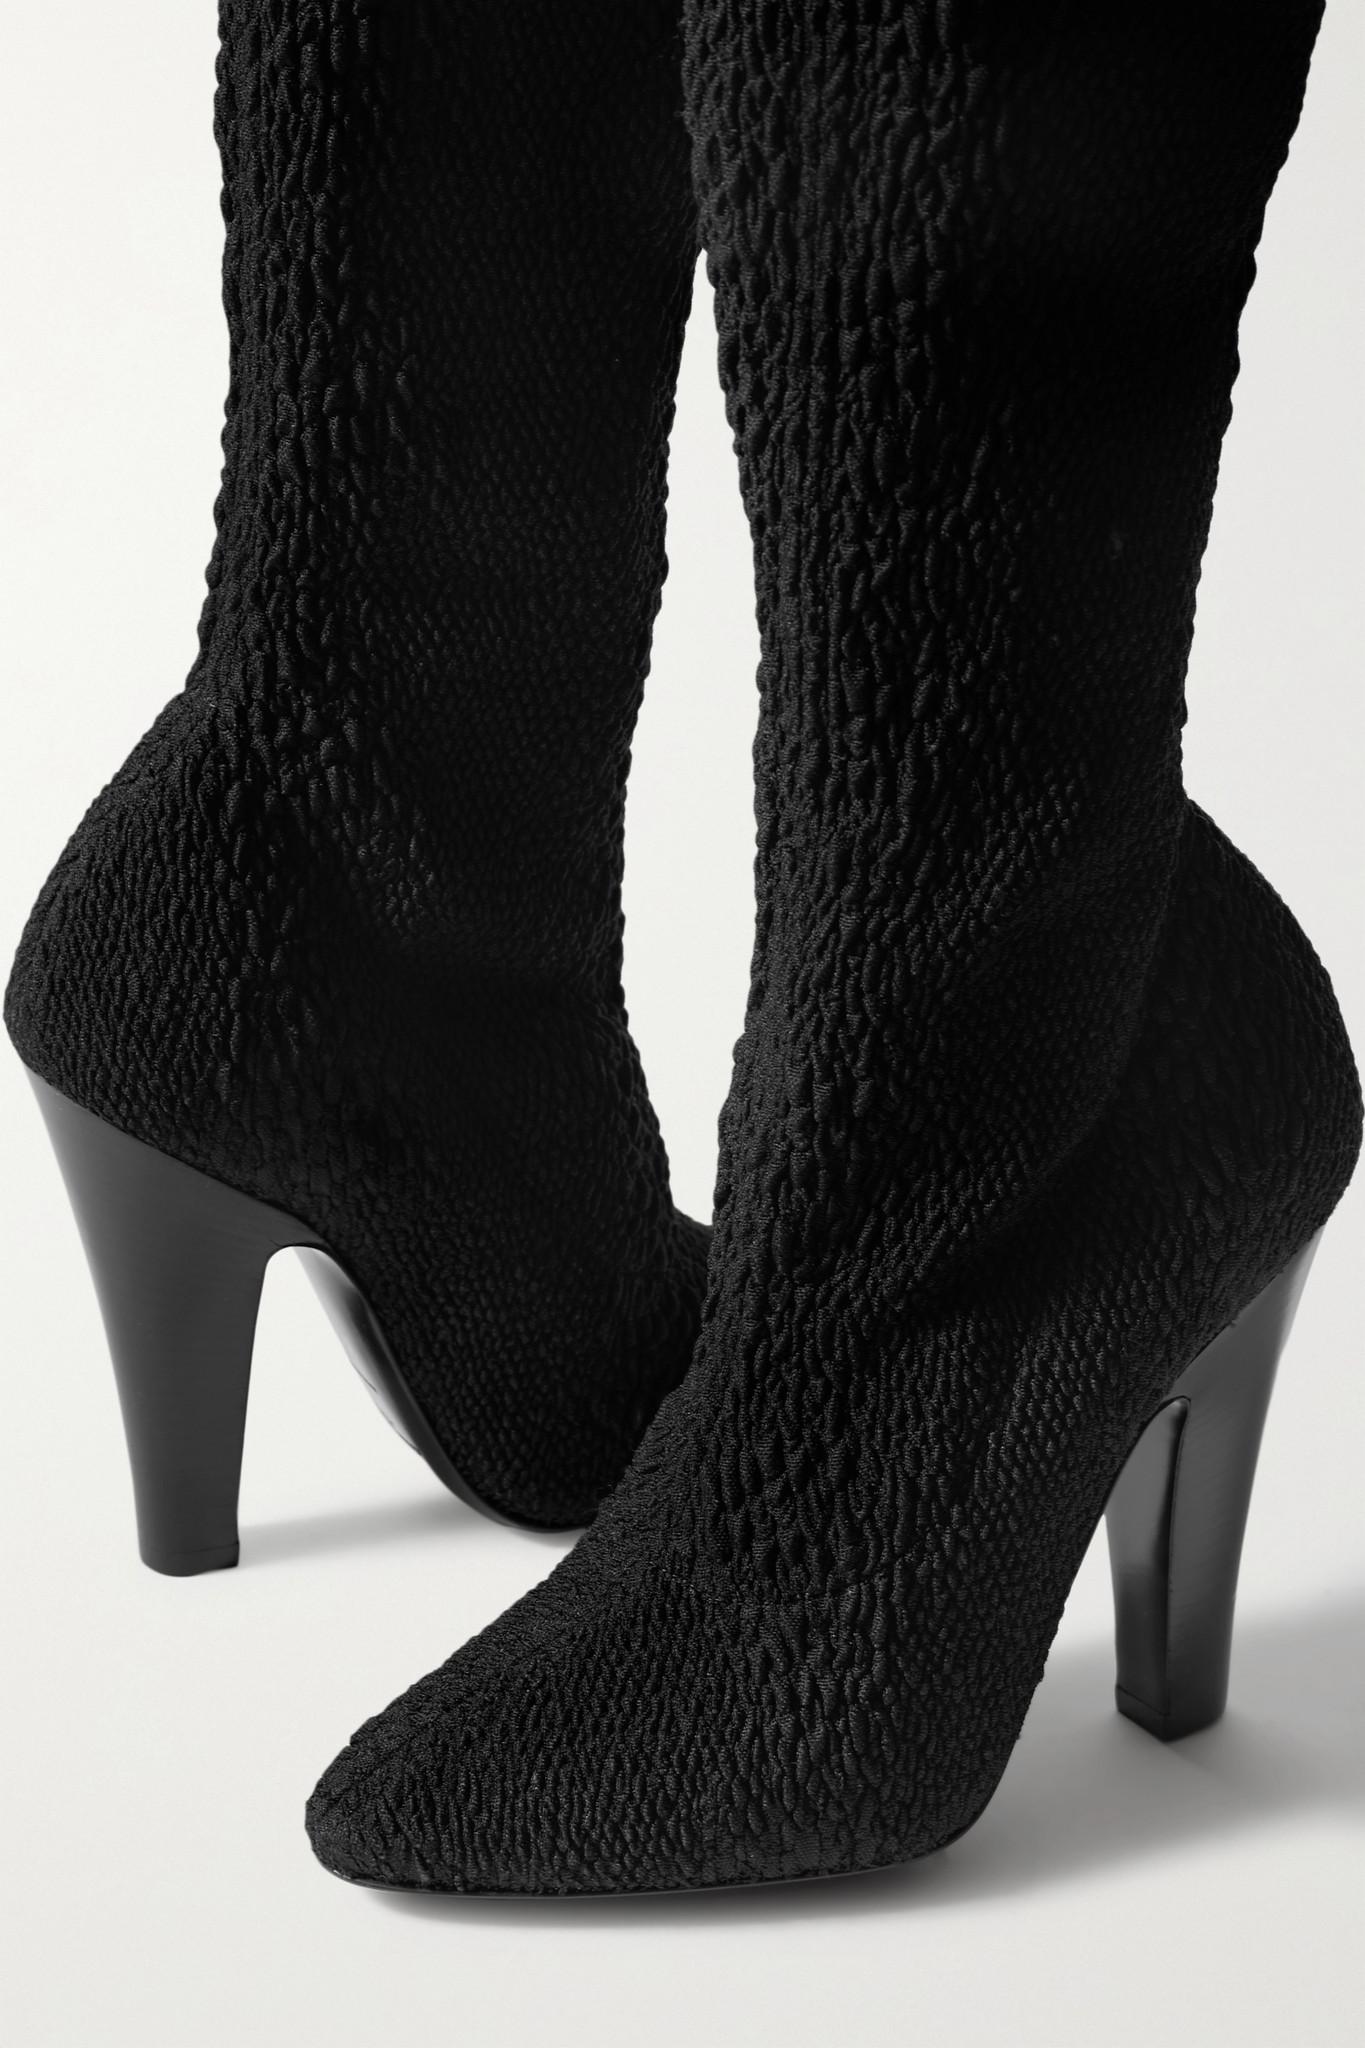 Saint Laurent Koller Stretch-cloqué Over-the-knee Boots in Black | Lyst